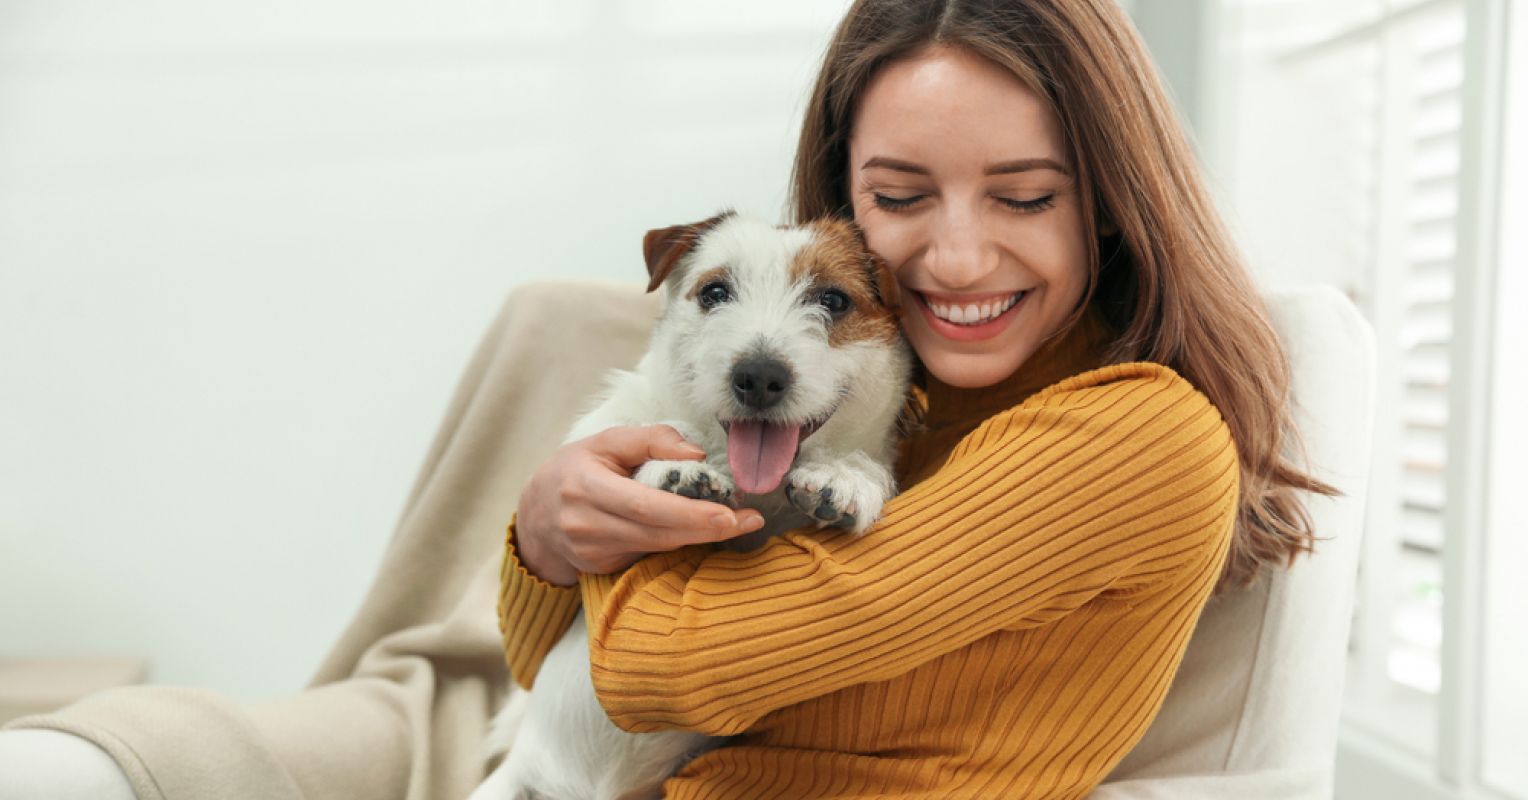 The 3 Reasons We Love Our Pets So Much | Psychology Today